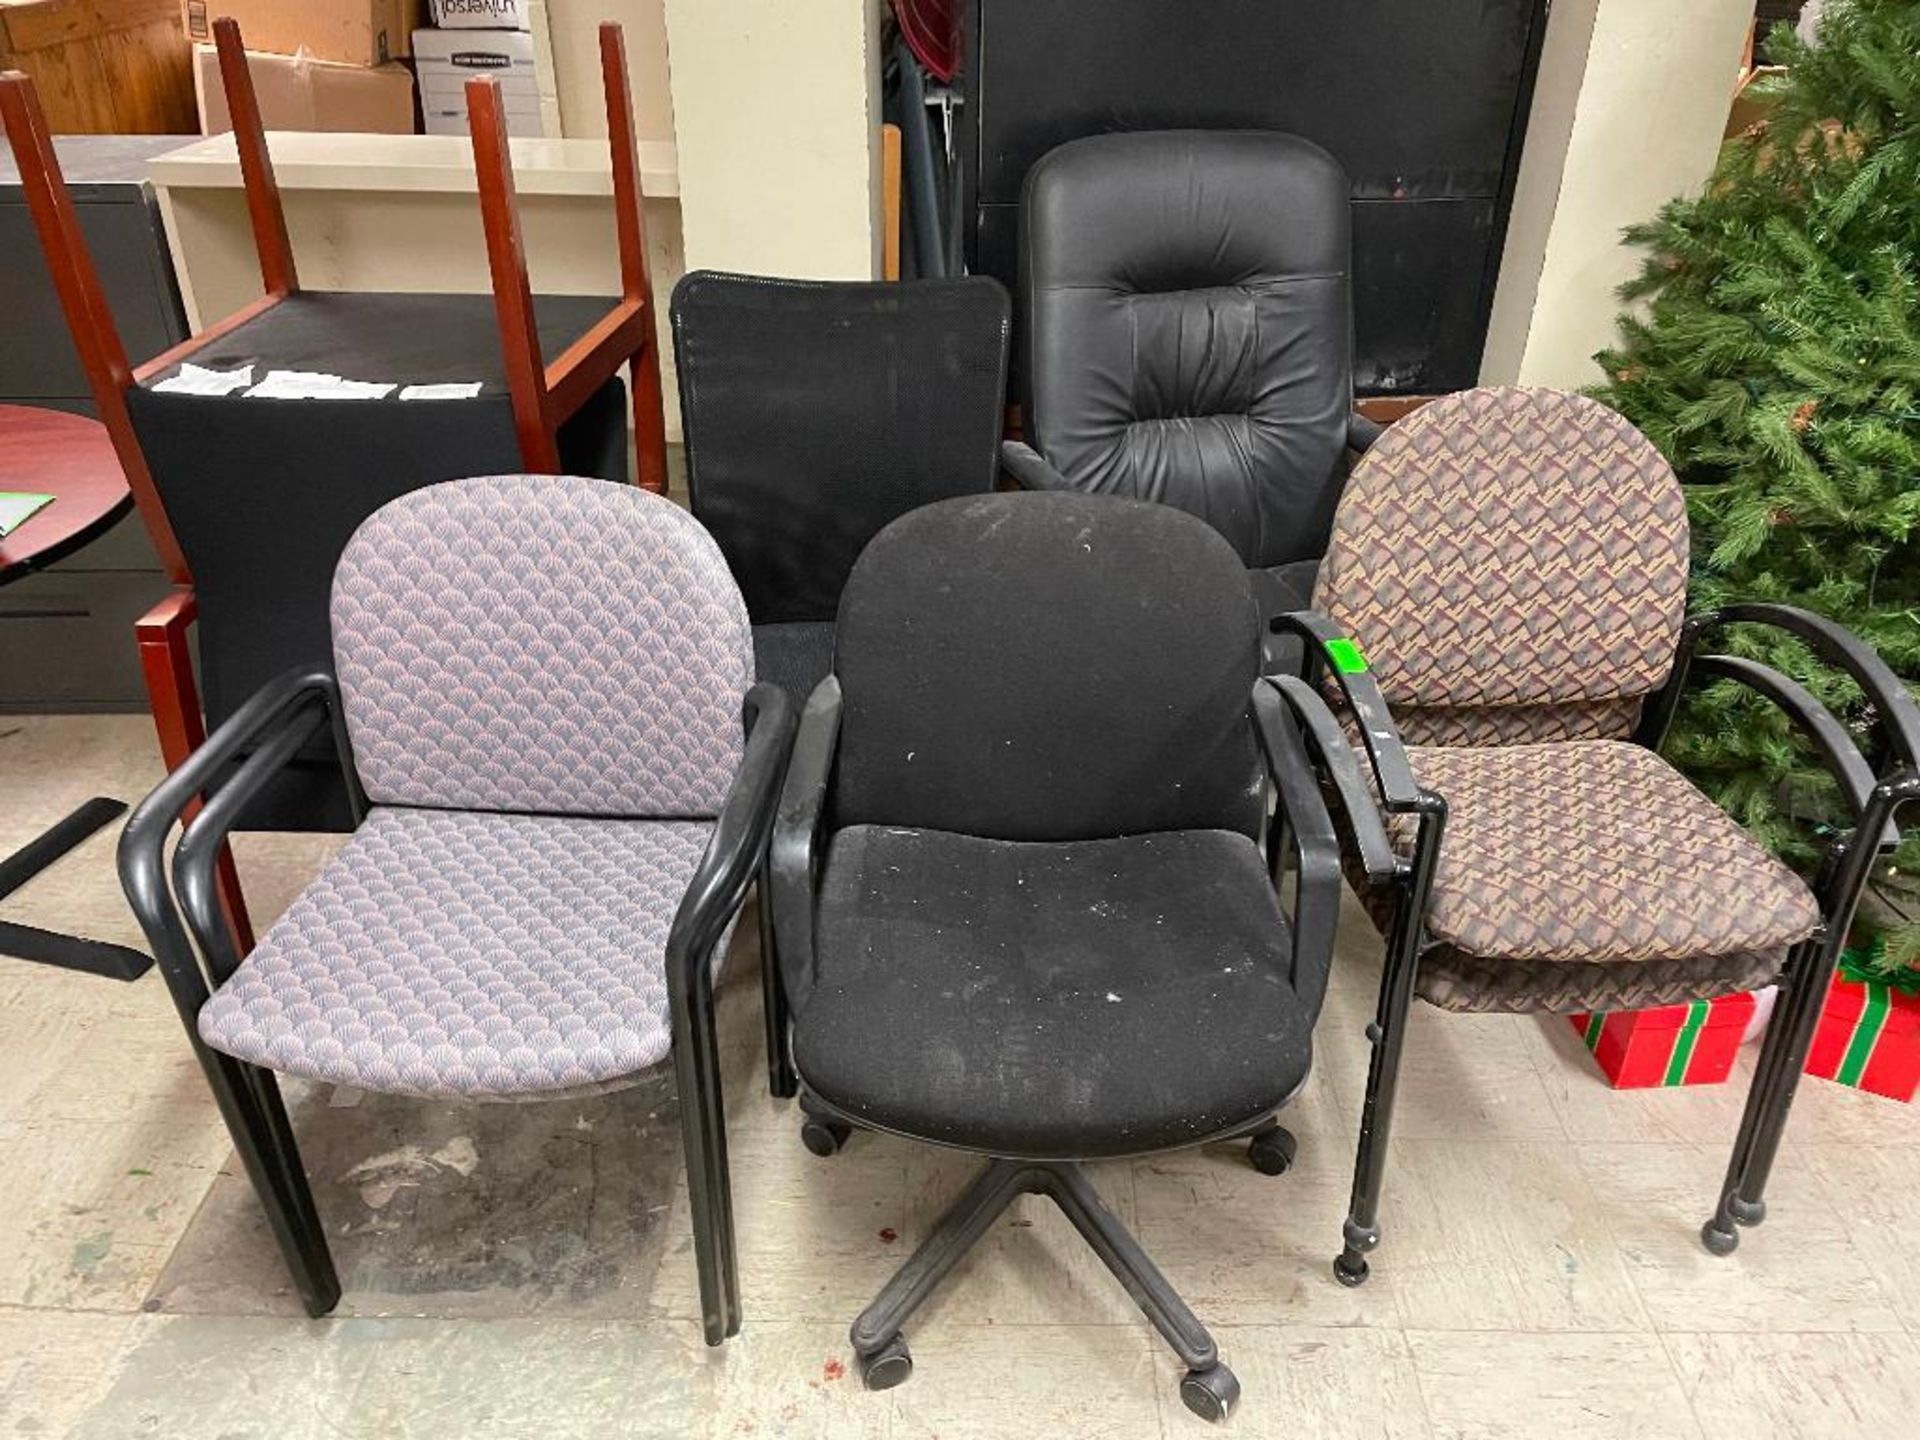 DESCRIPTION: ASSORTED CHAIRS - ROLLING / ARM / WAITING / ETC. ADDITIONAL INFORMATION: SOLD AS SET. T